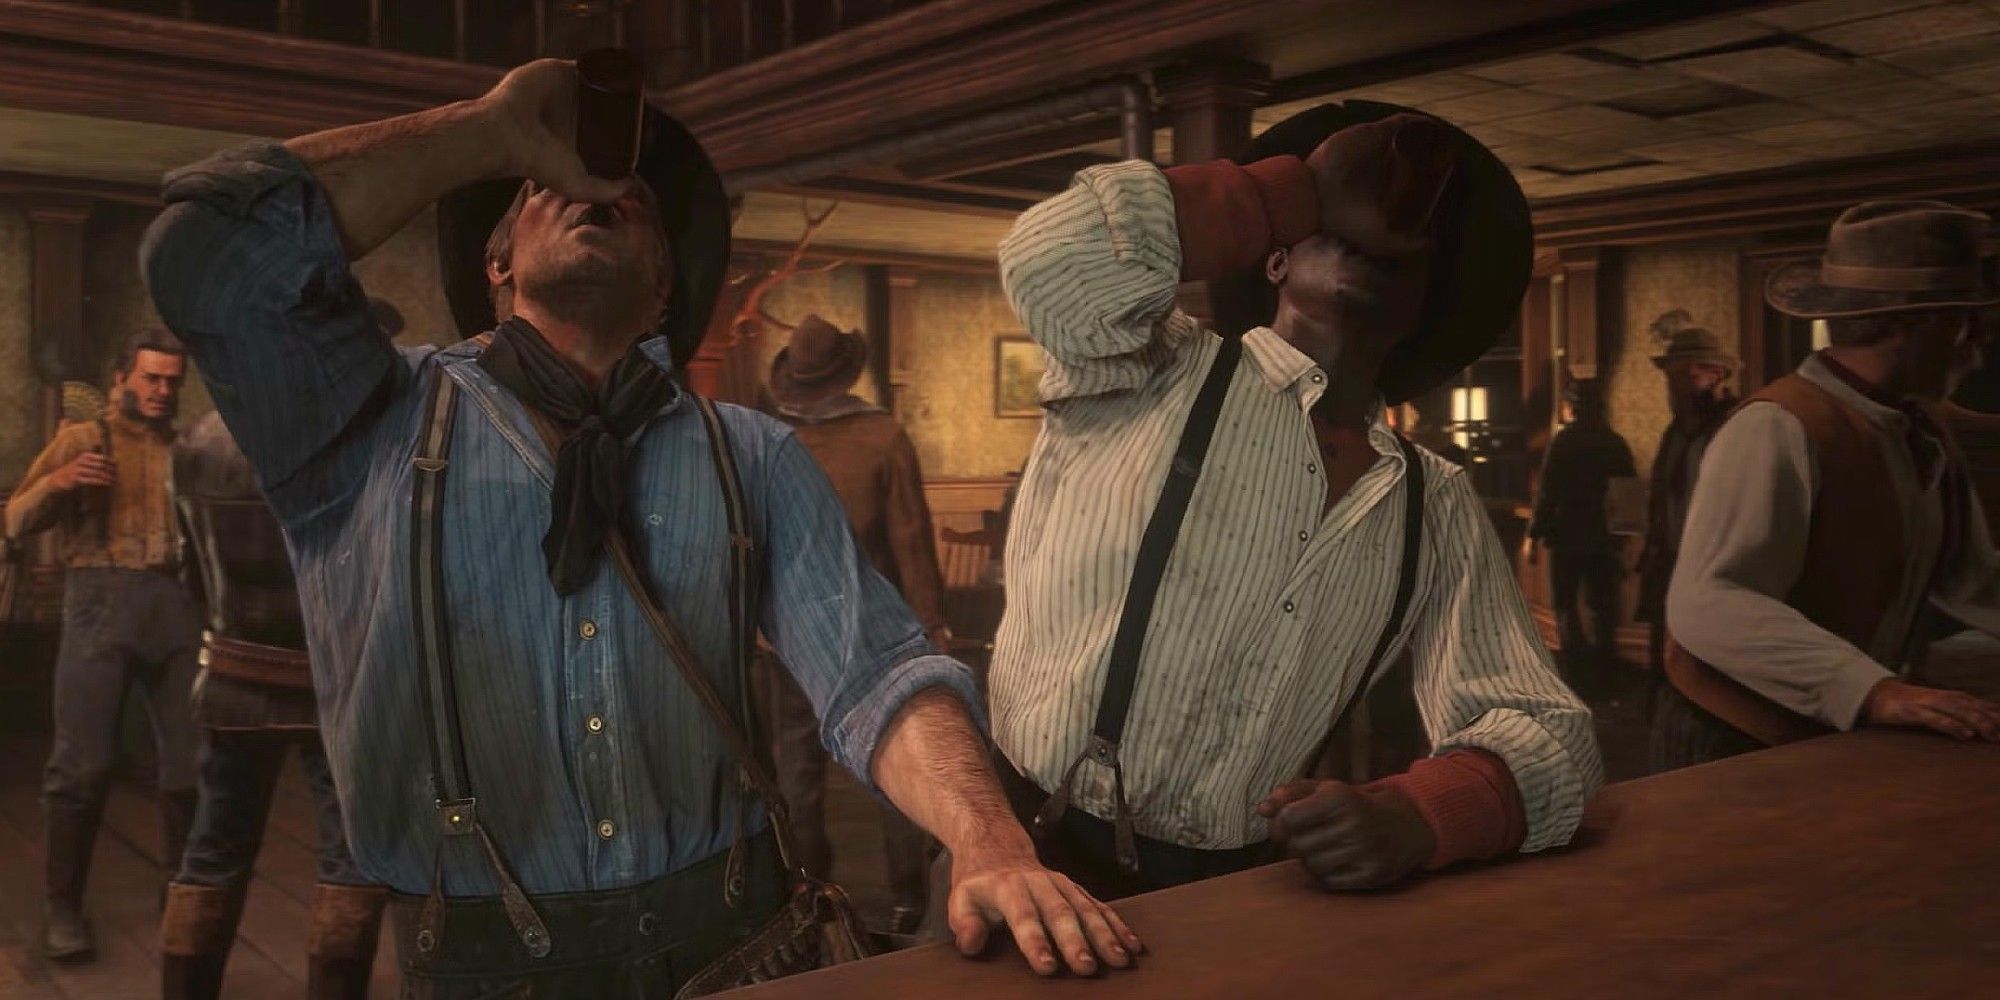 Five Years Later, Red Dead Redemption 2's Open World Remains Unrivaled